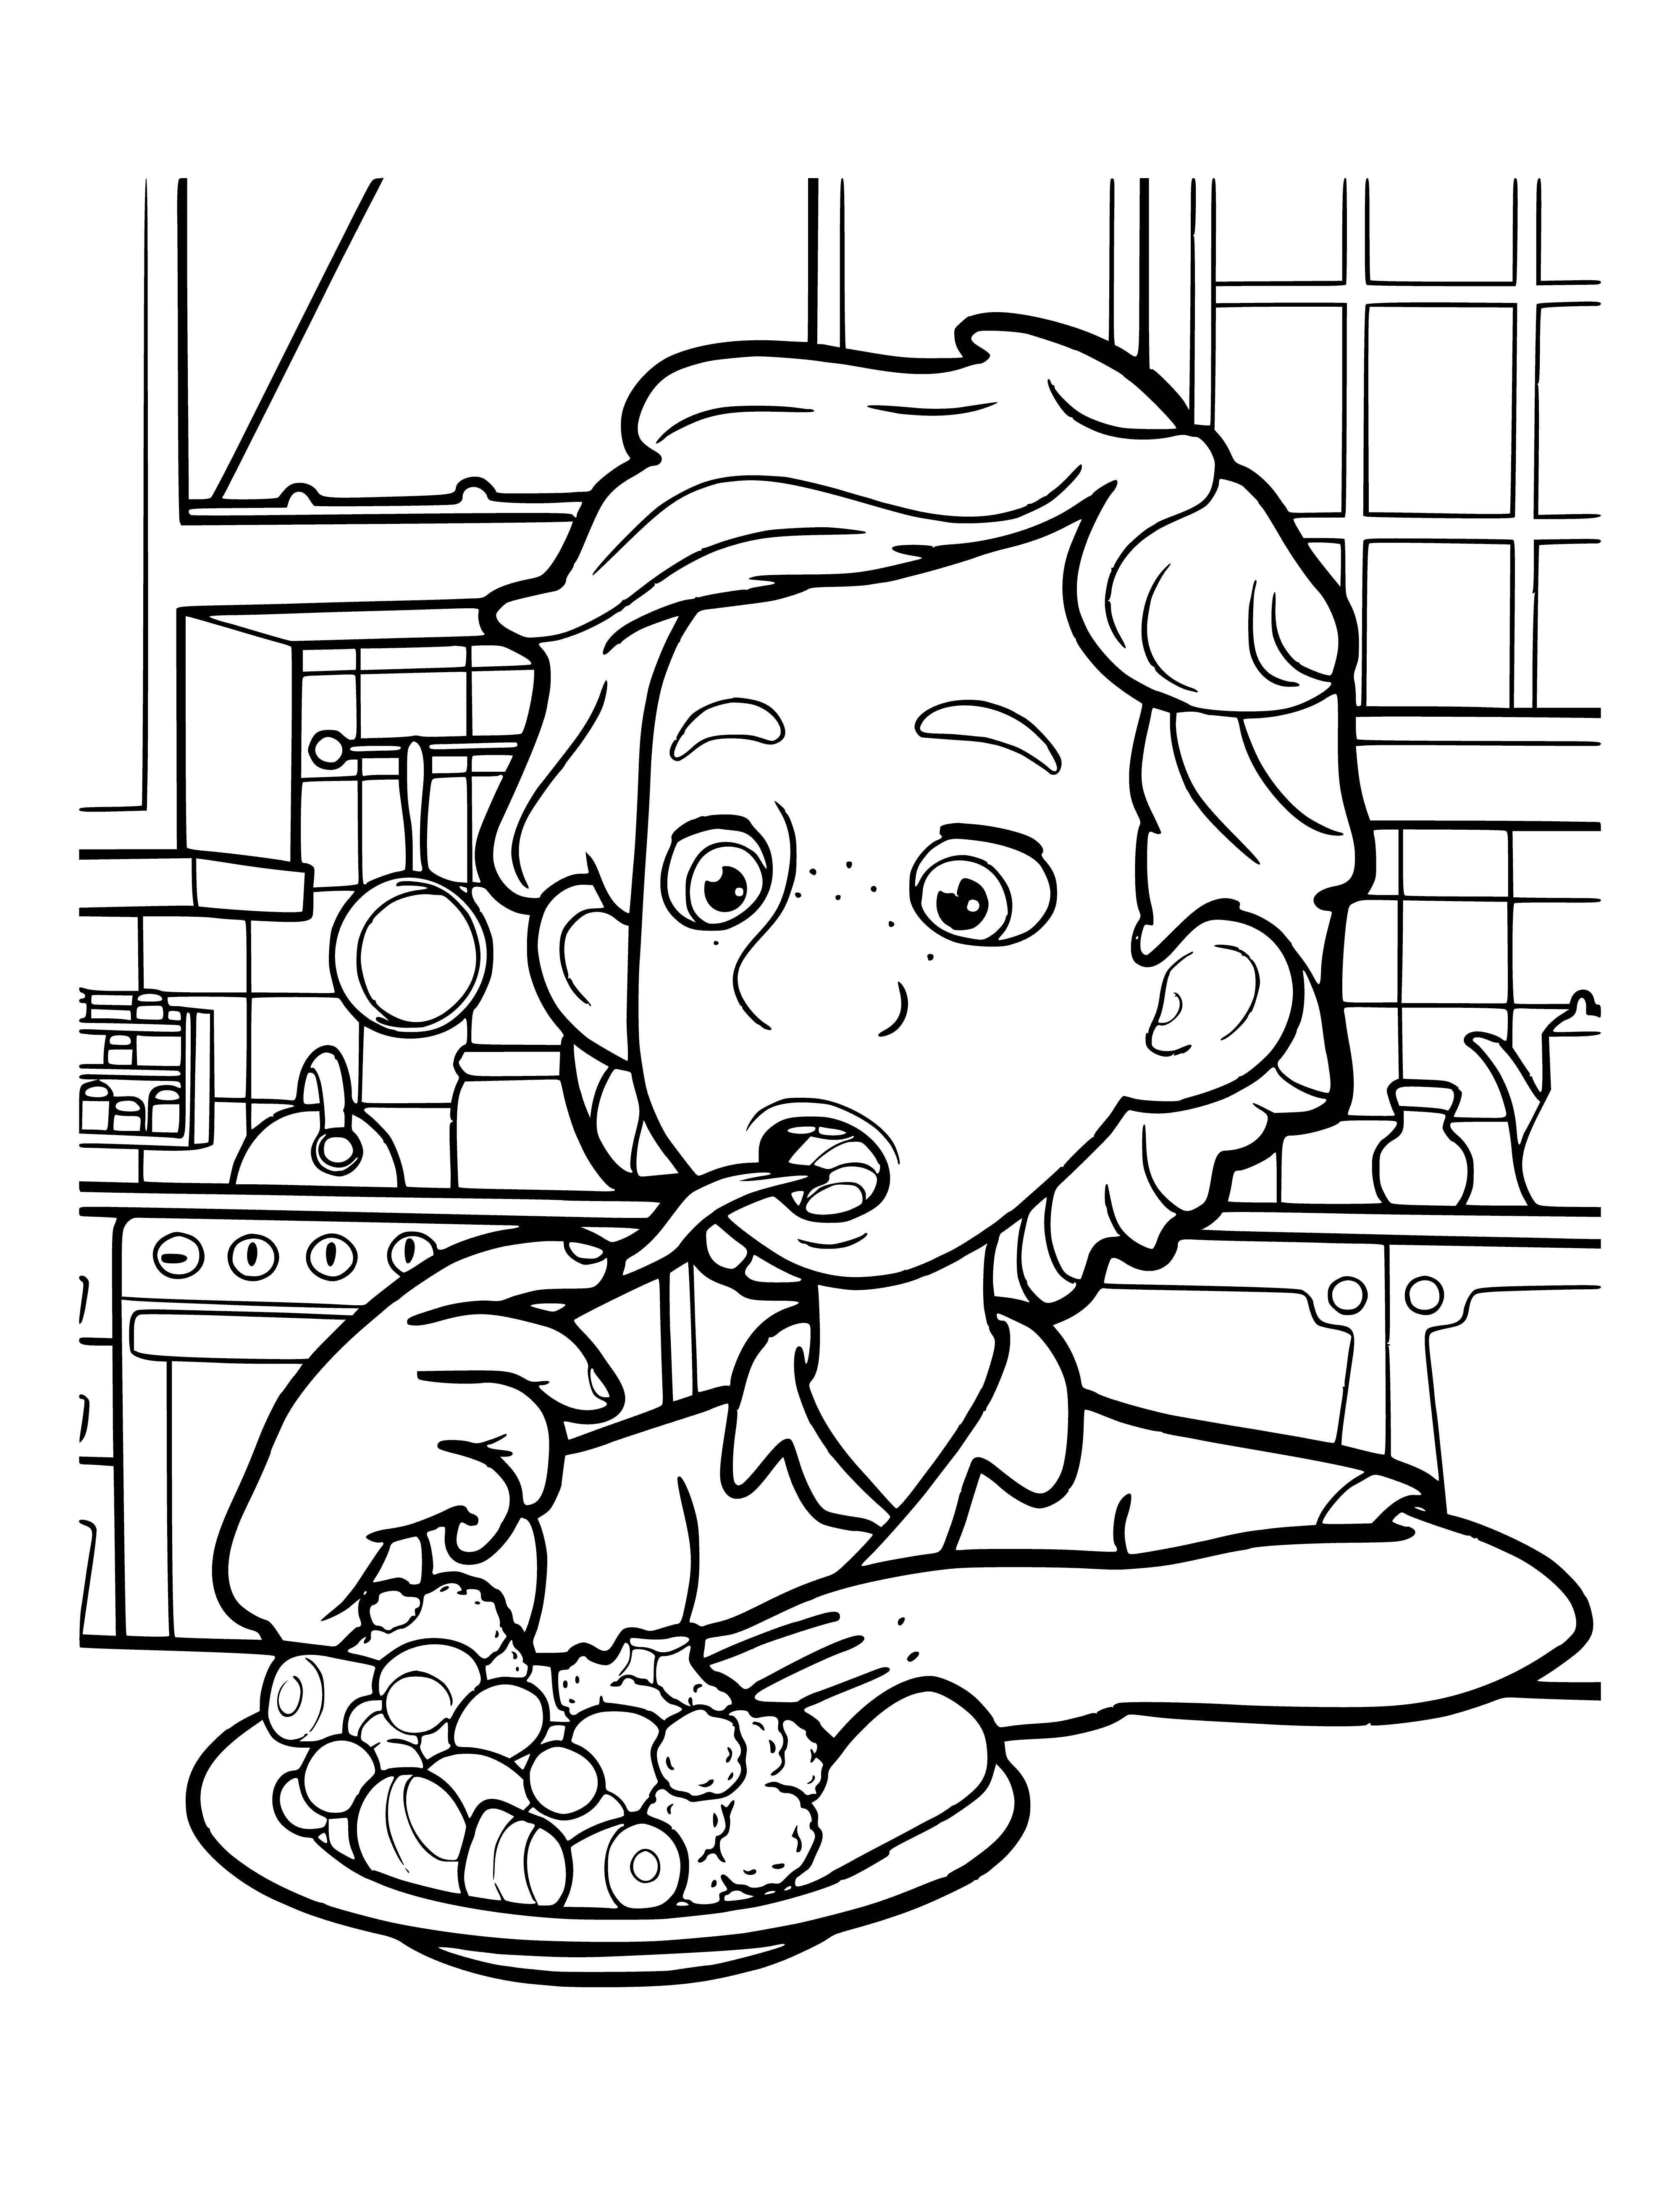 coloring page: Dimych is a tiny Fixie with a big head, blue clothes and black shoes, sporting a silver belt buckle.